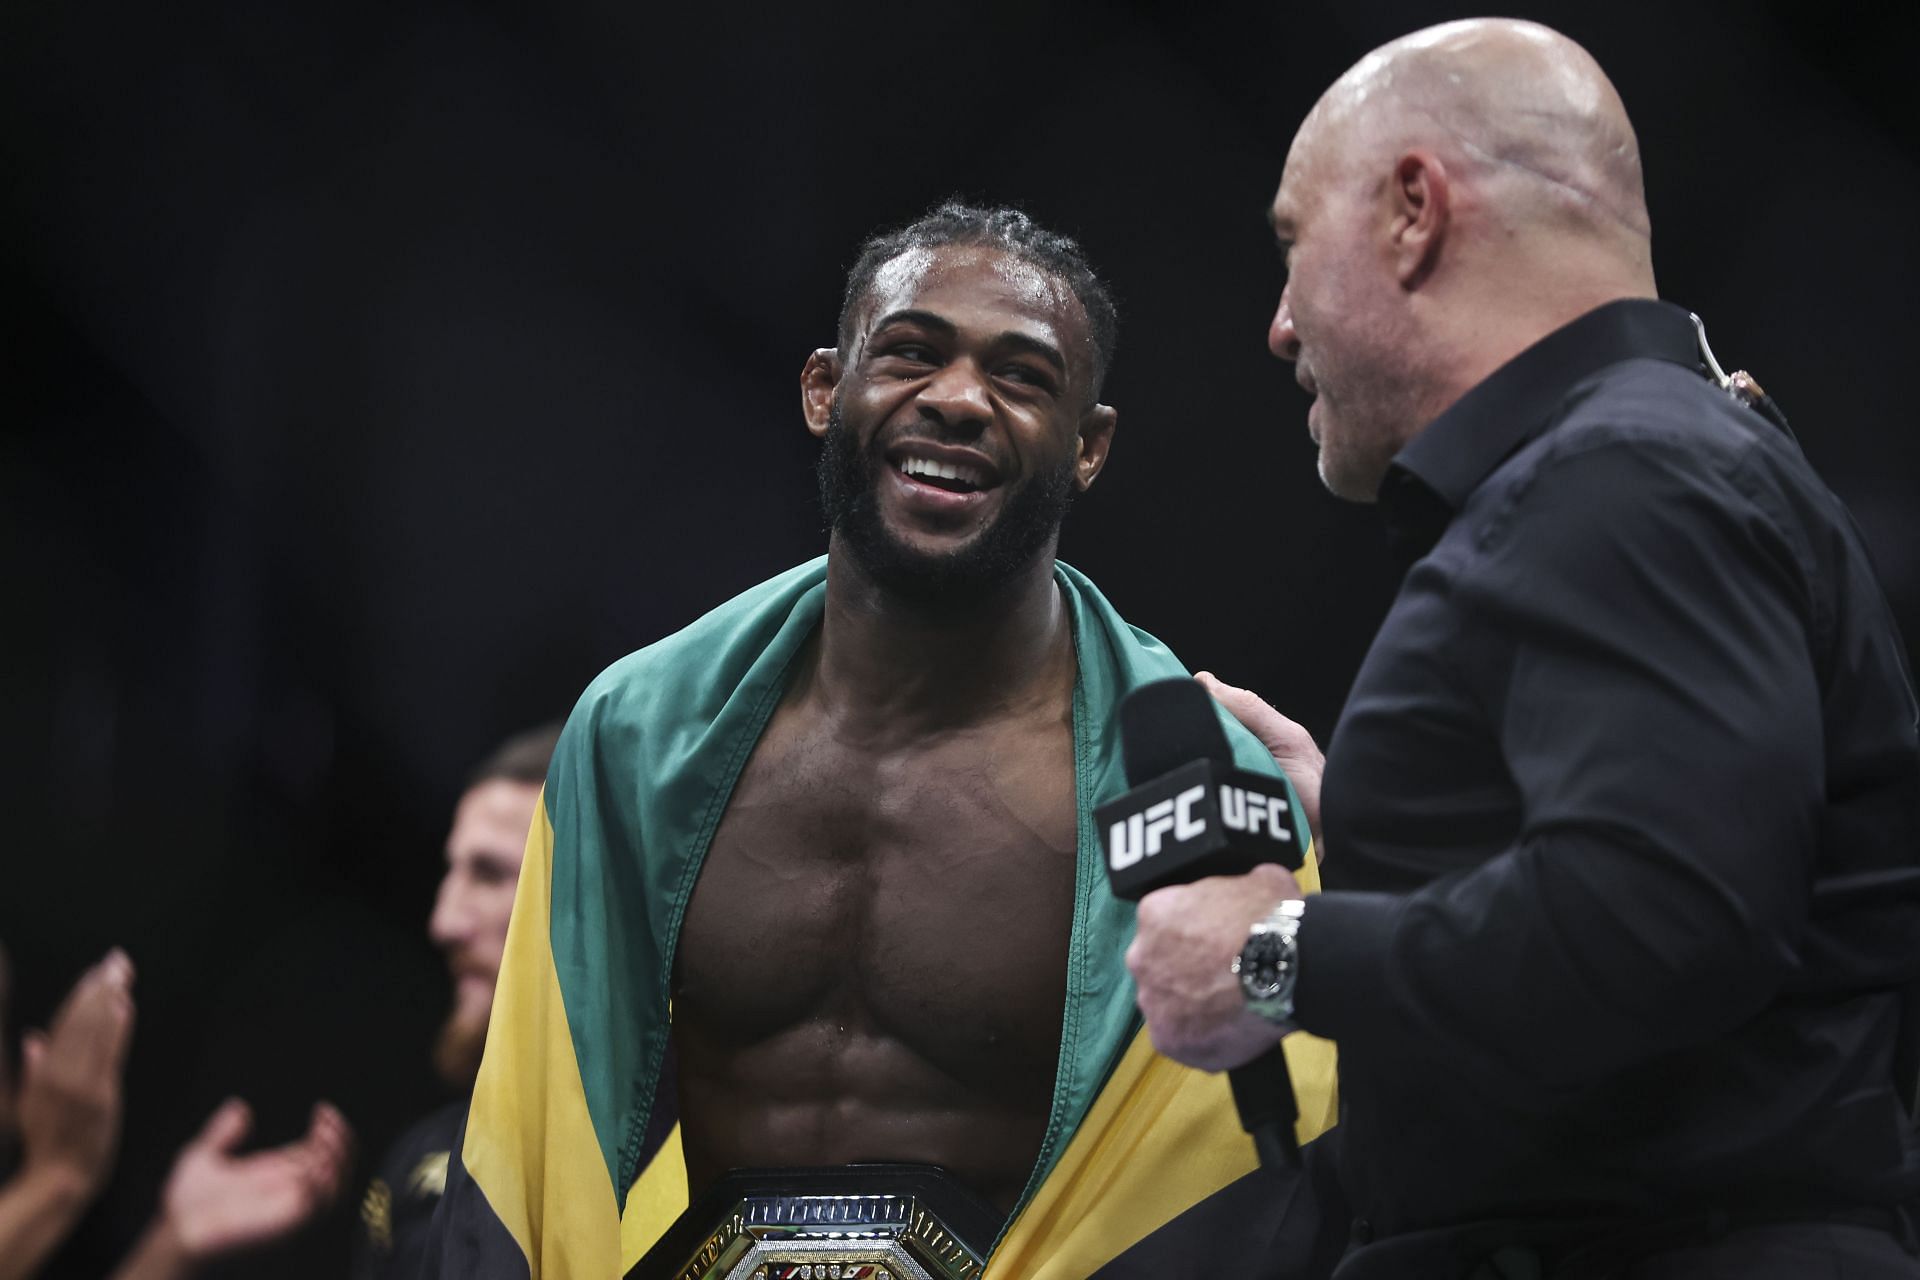 Aljamain Sterling will hope to prove his worth as bantamweight kingpin again this weekend